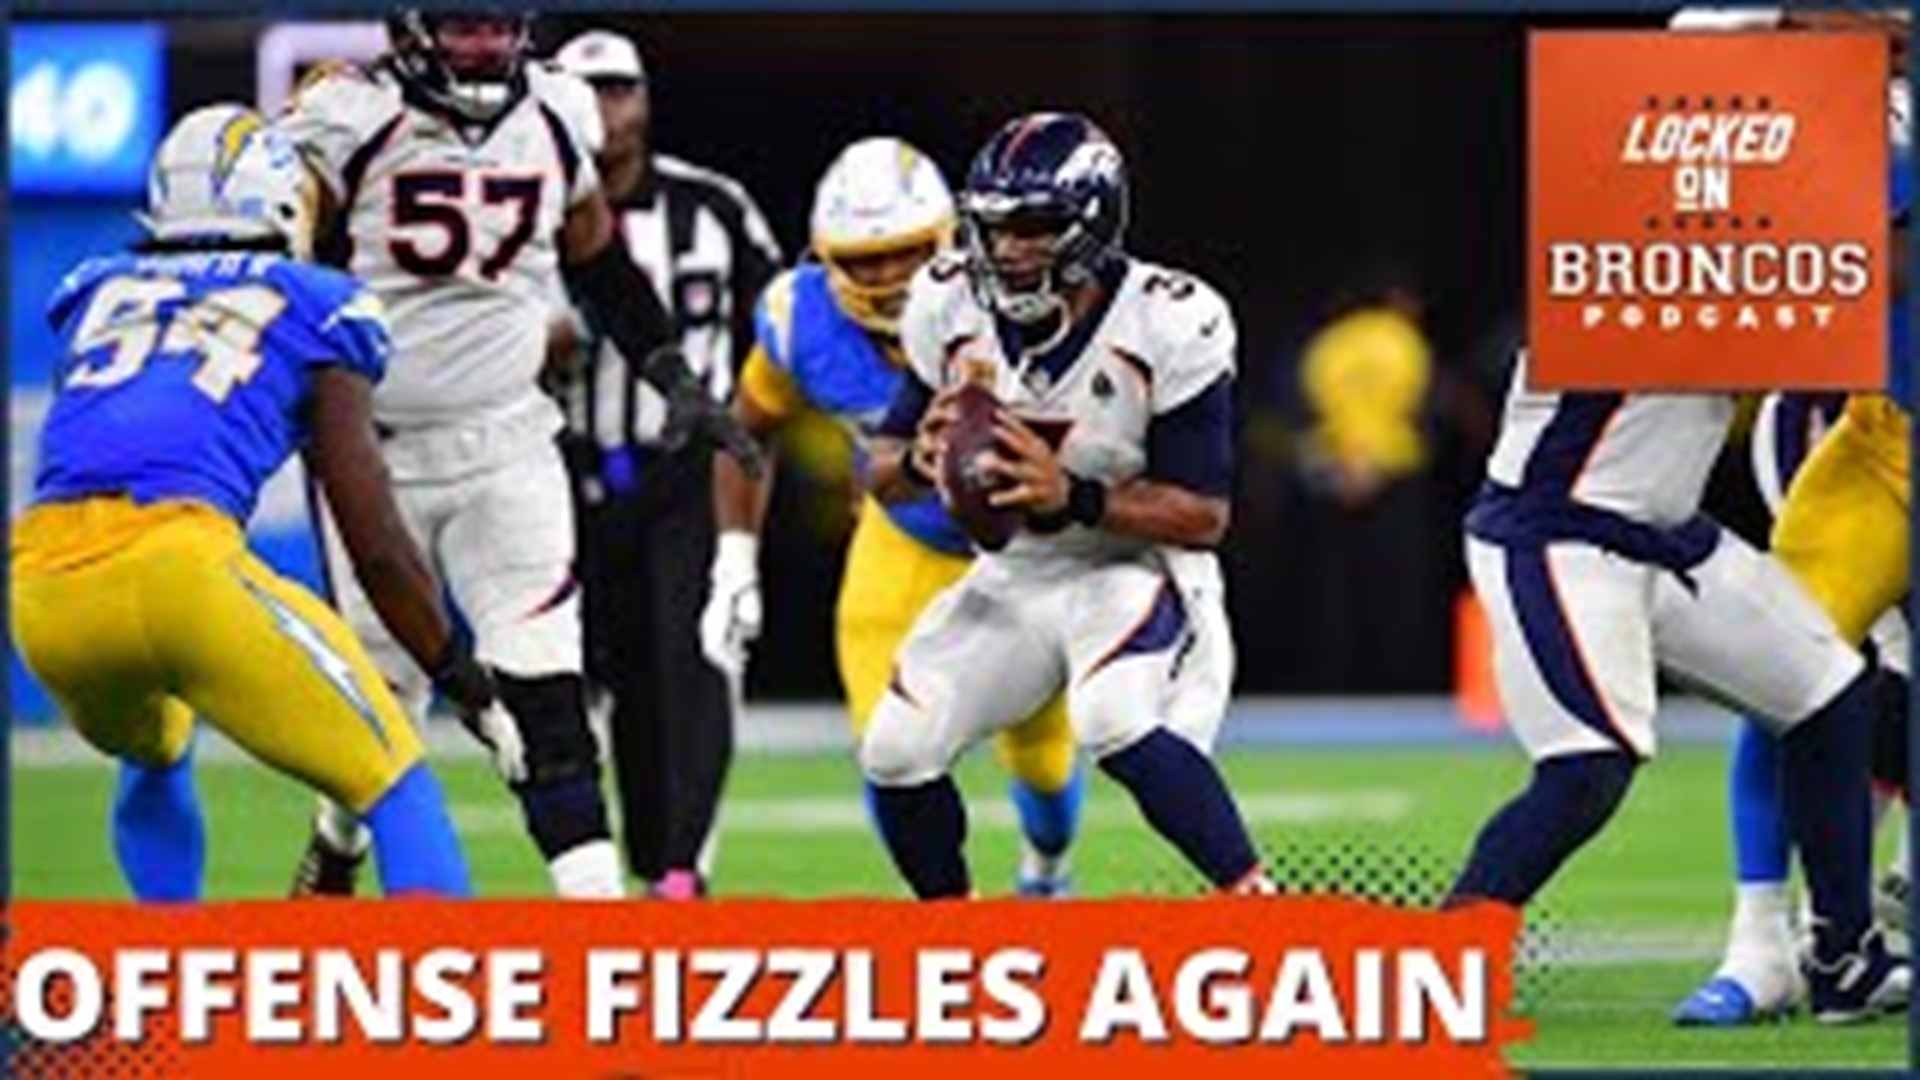 The Denver Broncos offense, Russell Wilson fizzled out in the second half in an overtime loss to the Los Angeles Chargers.